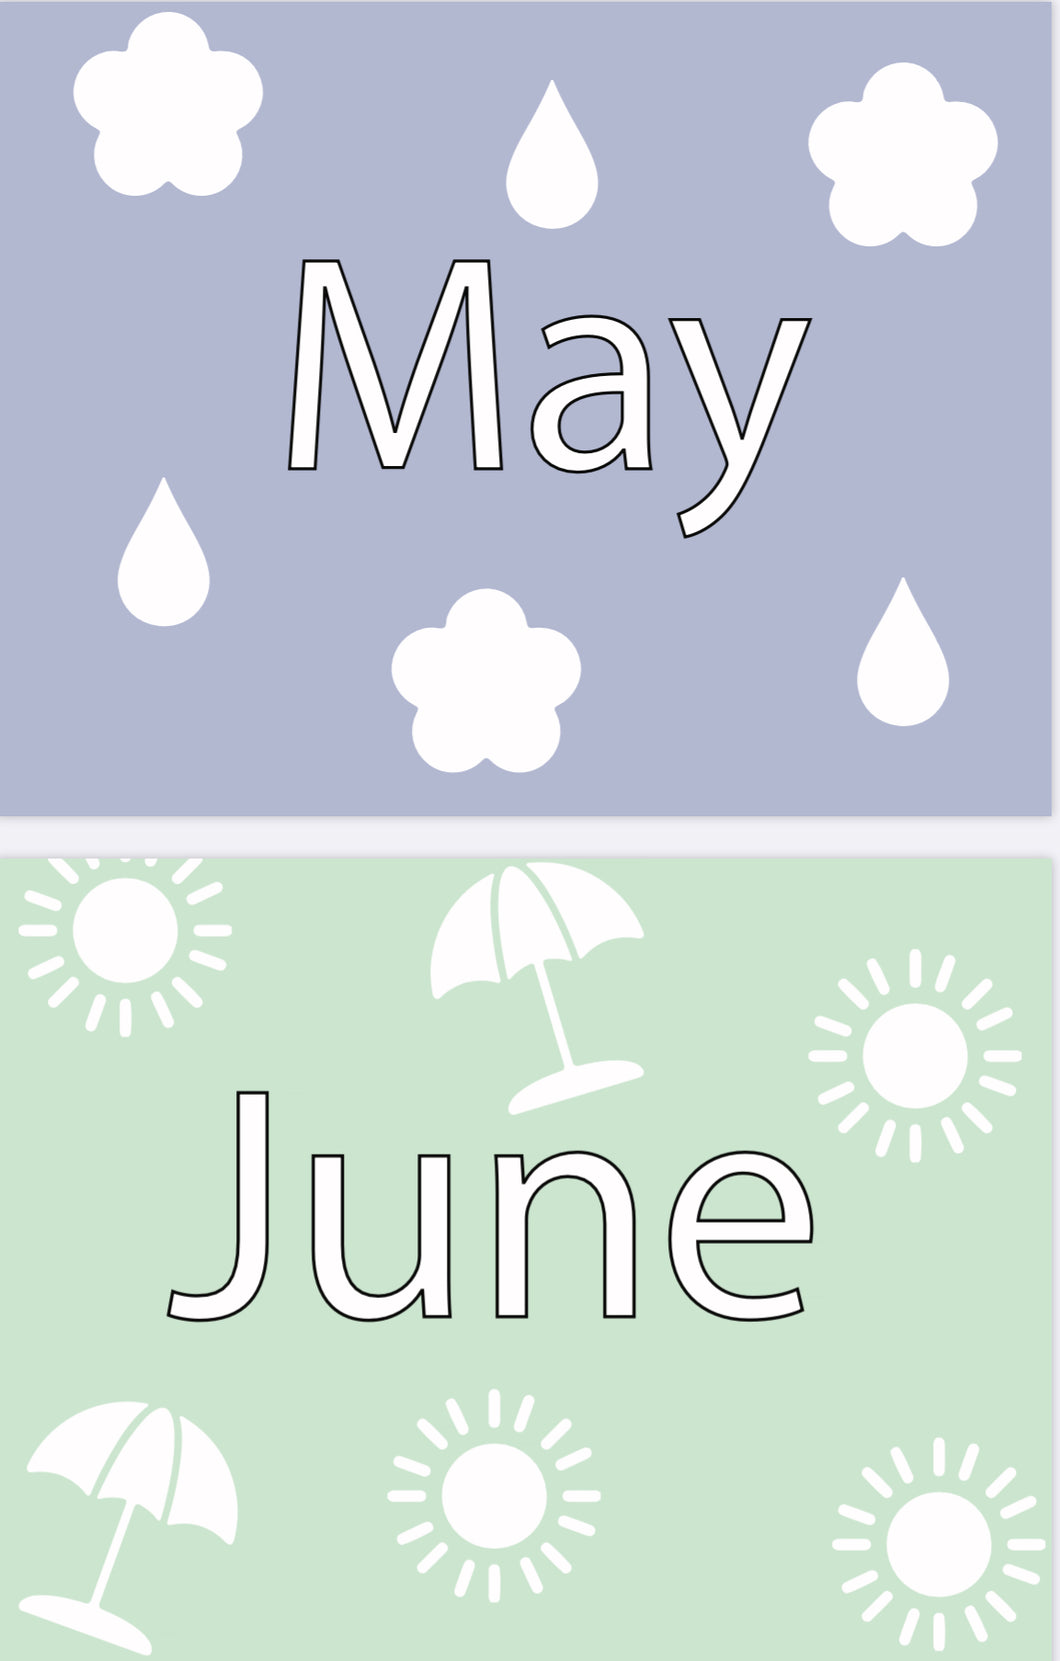 Days of the Week, Months of the Year & Seasons Flash Cards